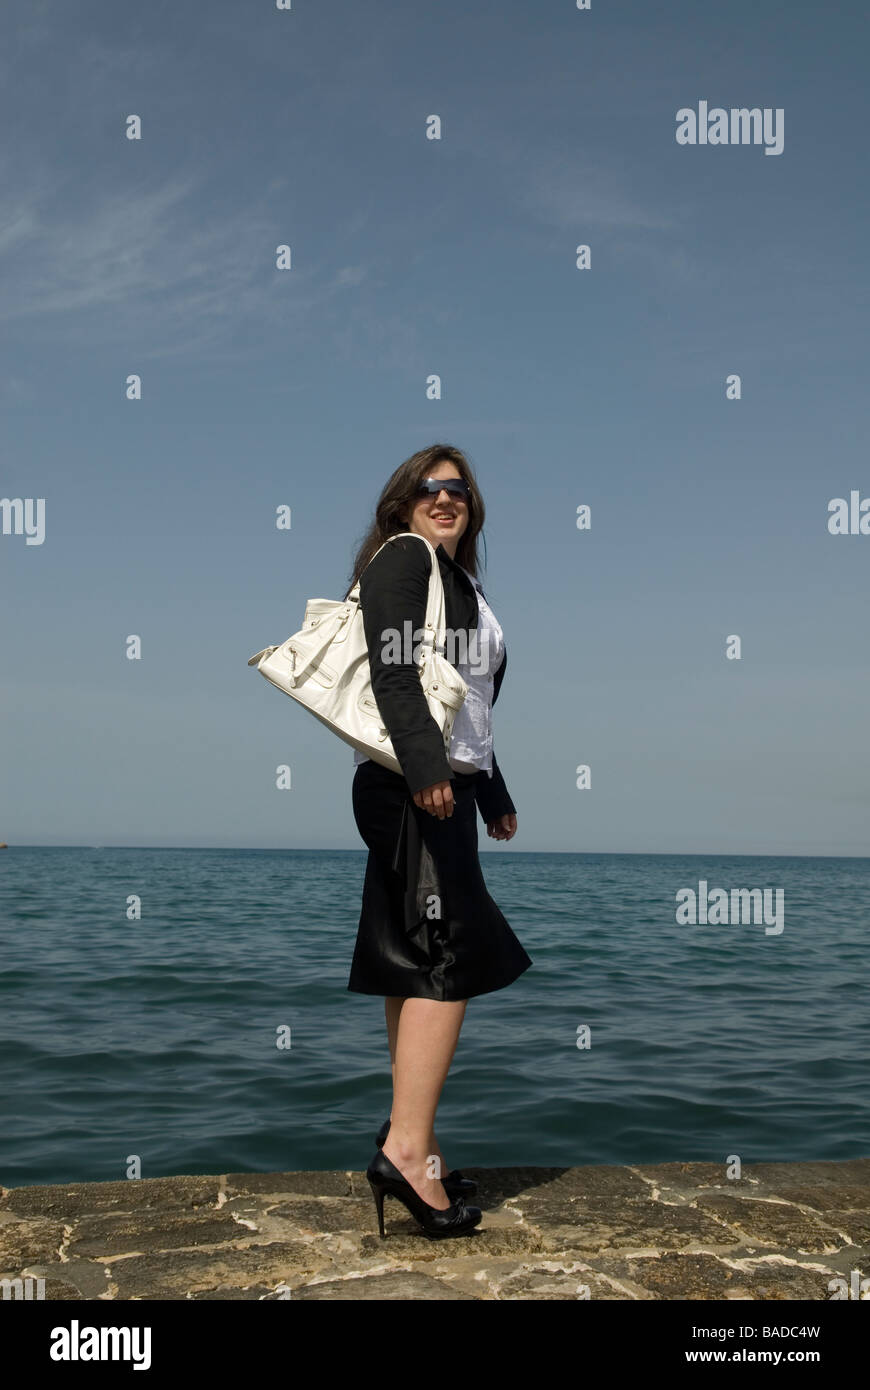 Business woman standing by the sea carrying a handbag Stock Photo